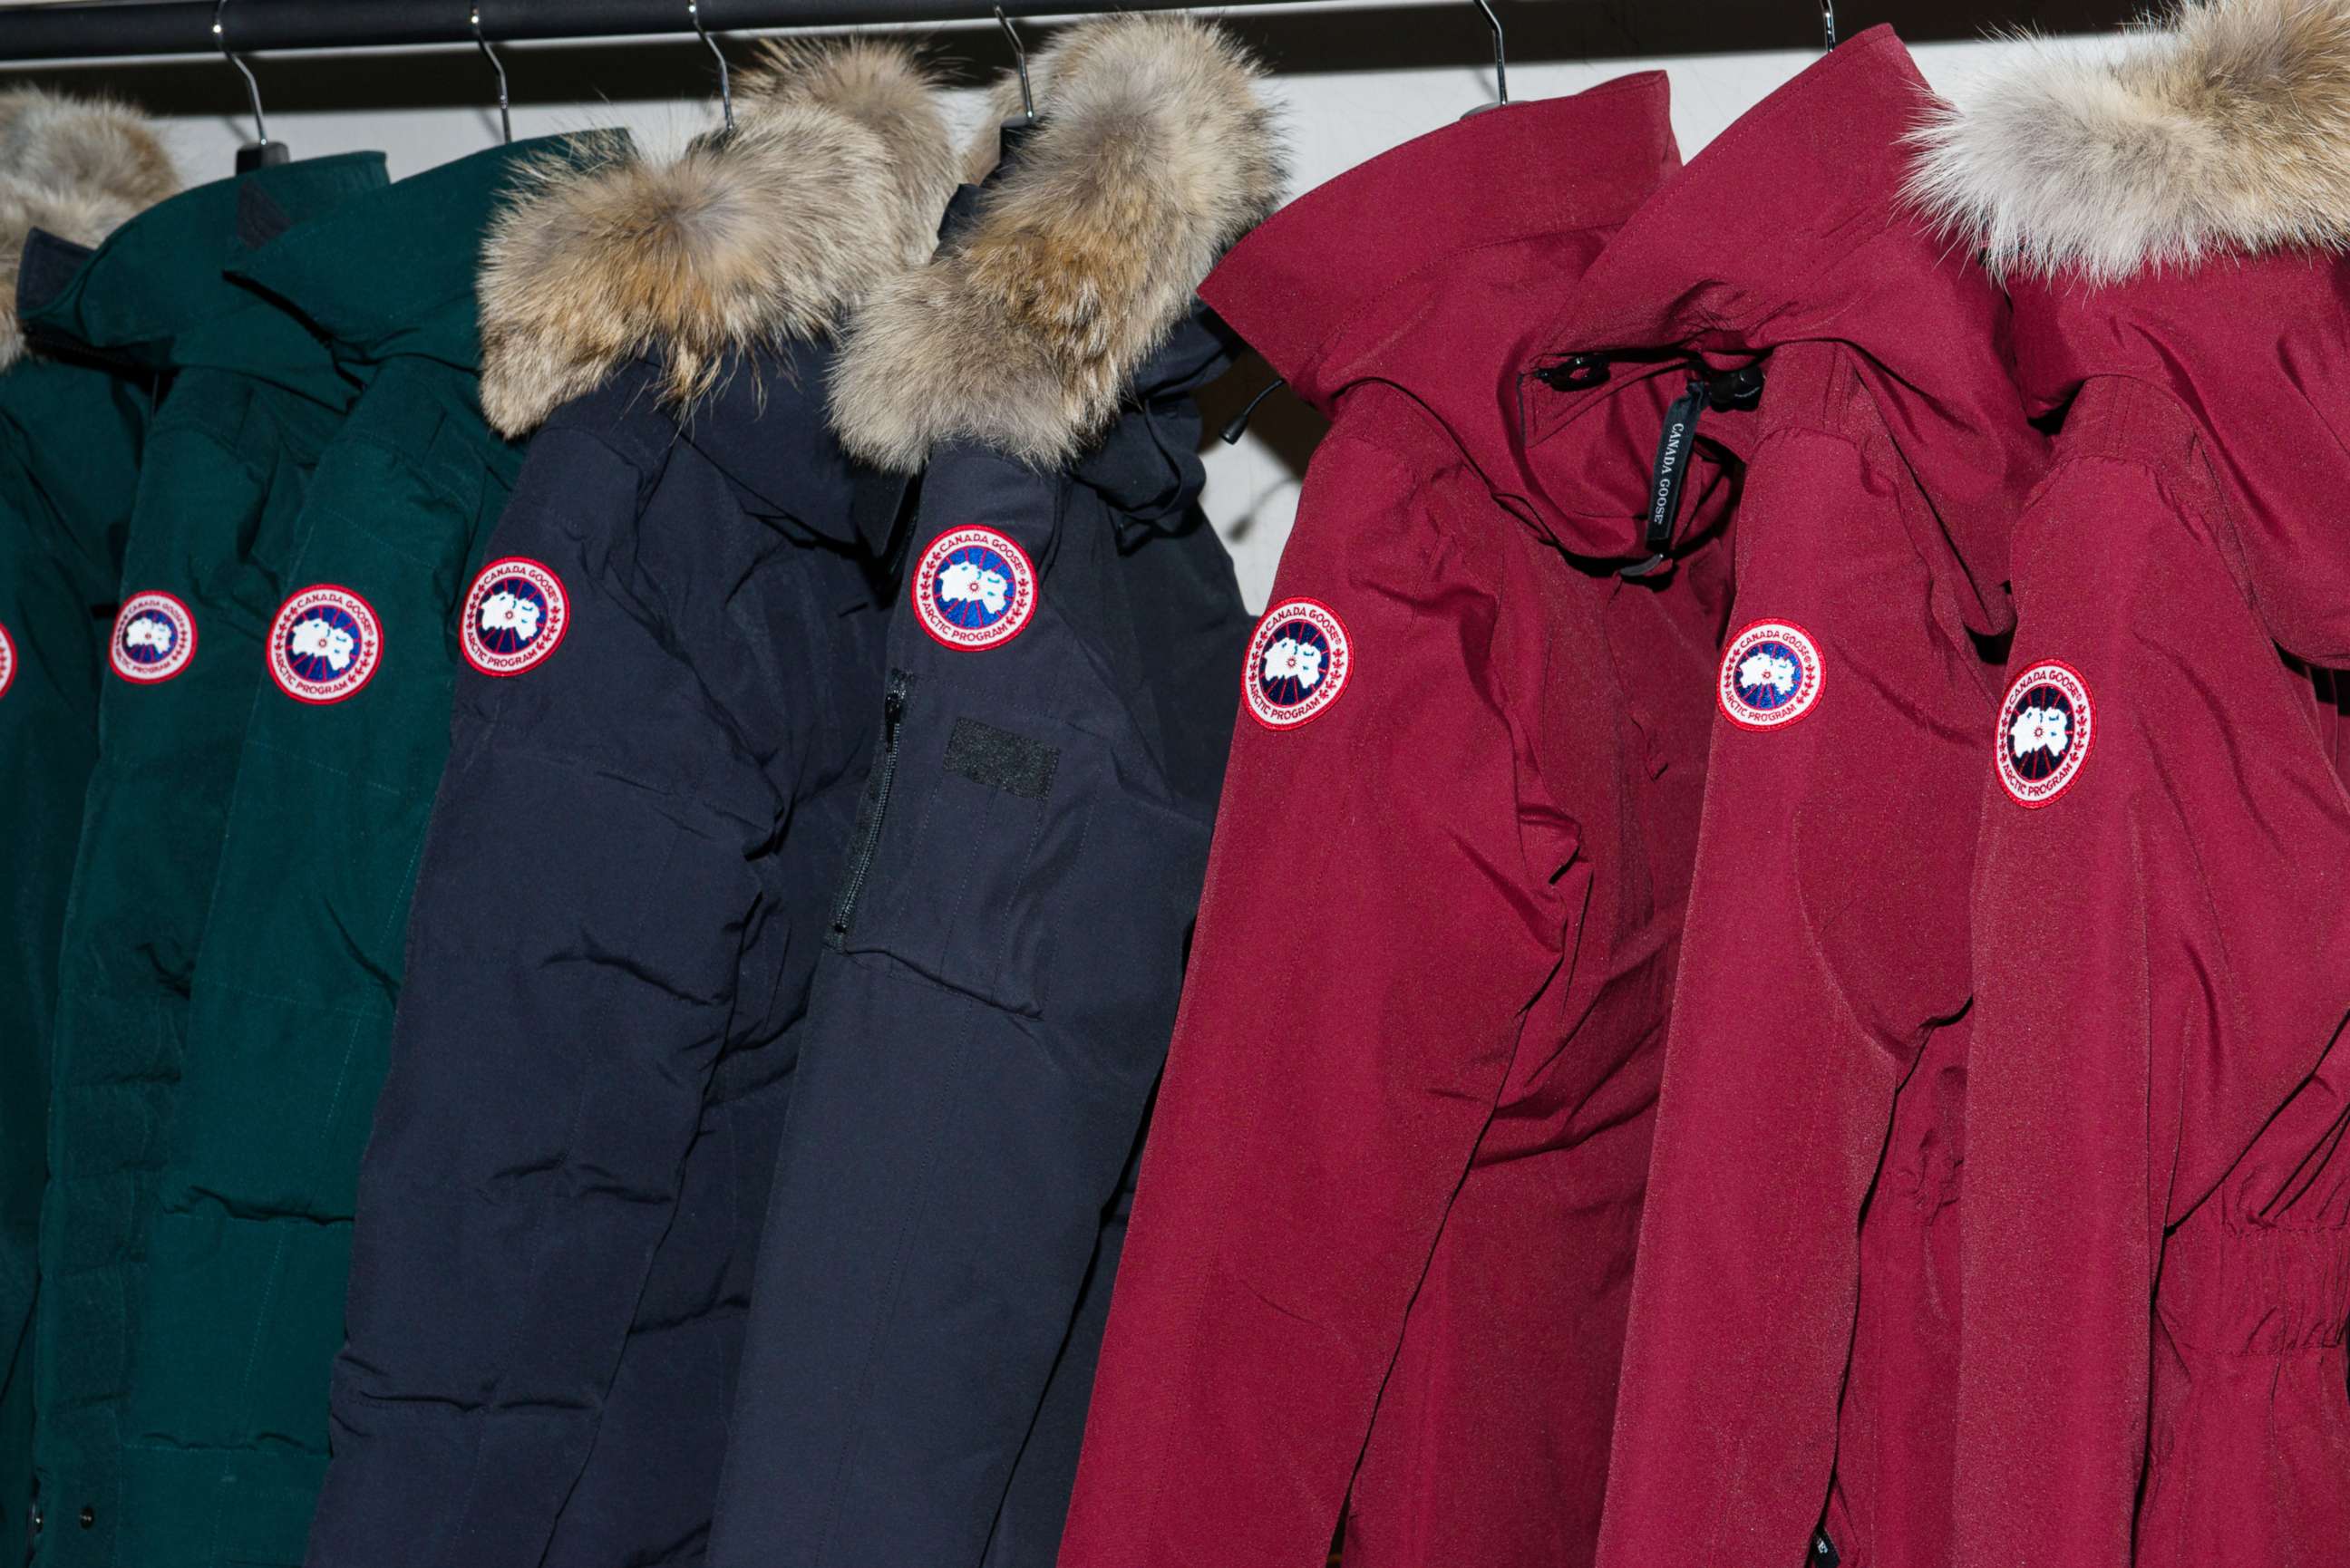 PHOTO: A view inside Canada Goose's U.S. flagship store, Nov. 16, 2016, in New York.